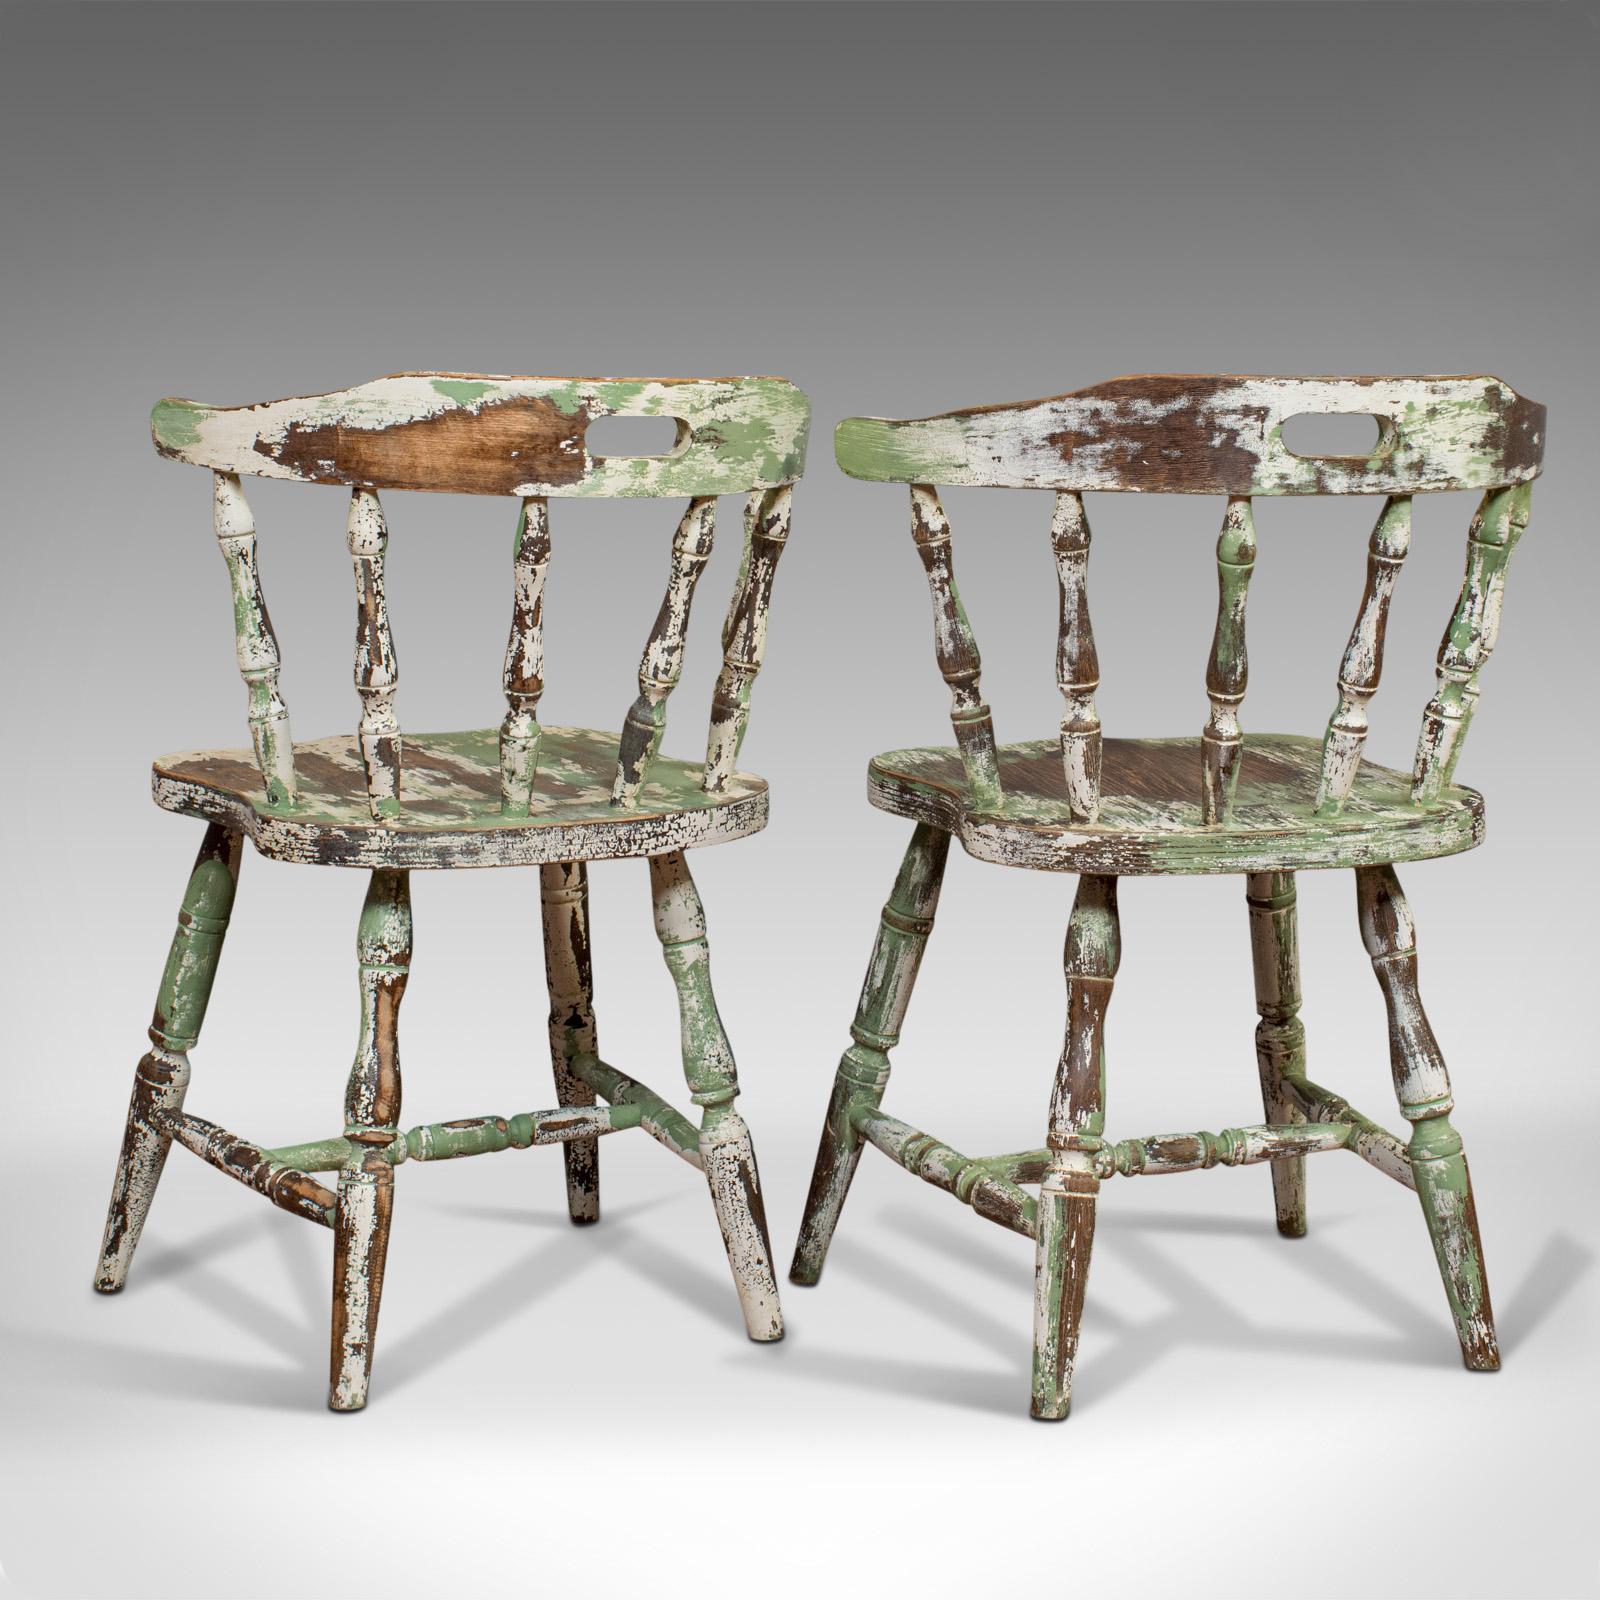 Hand-Painted Pair of Antique Windsor Chairs, French, Beech, Bow Back Chair, Late 19th Century